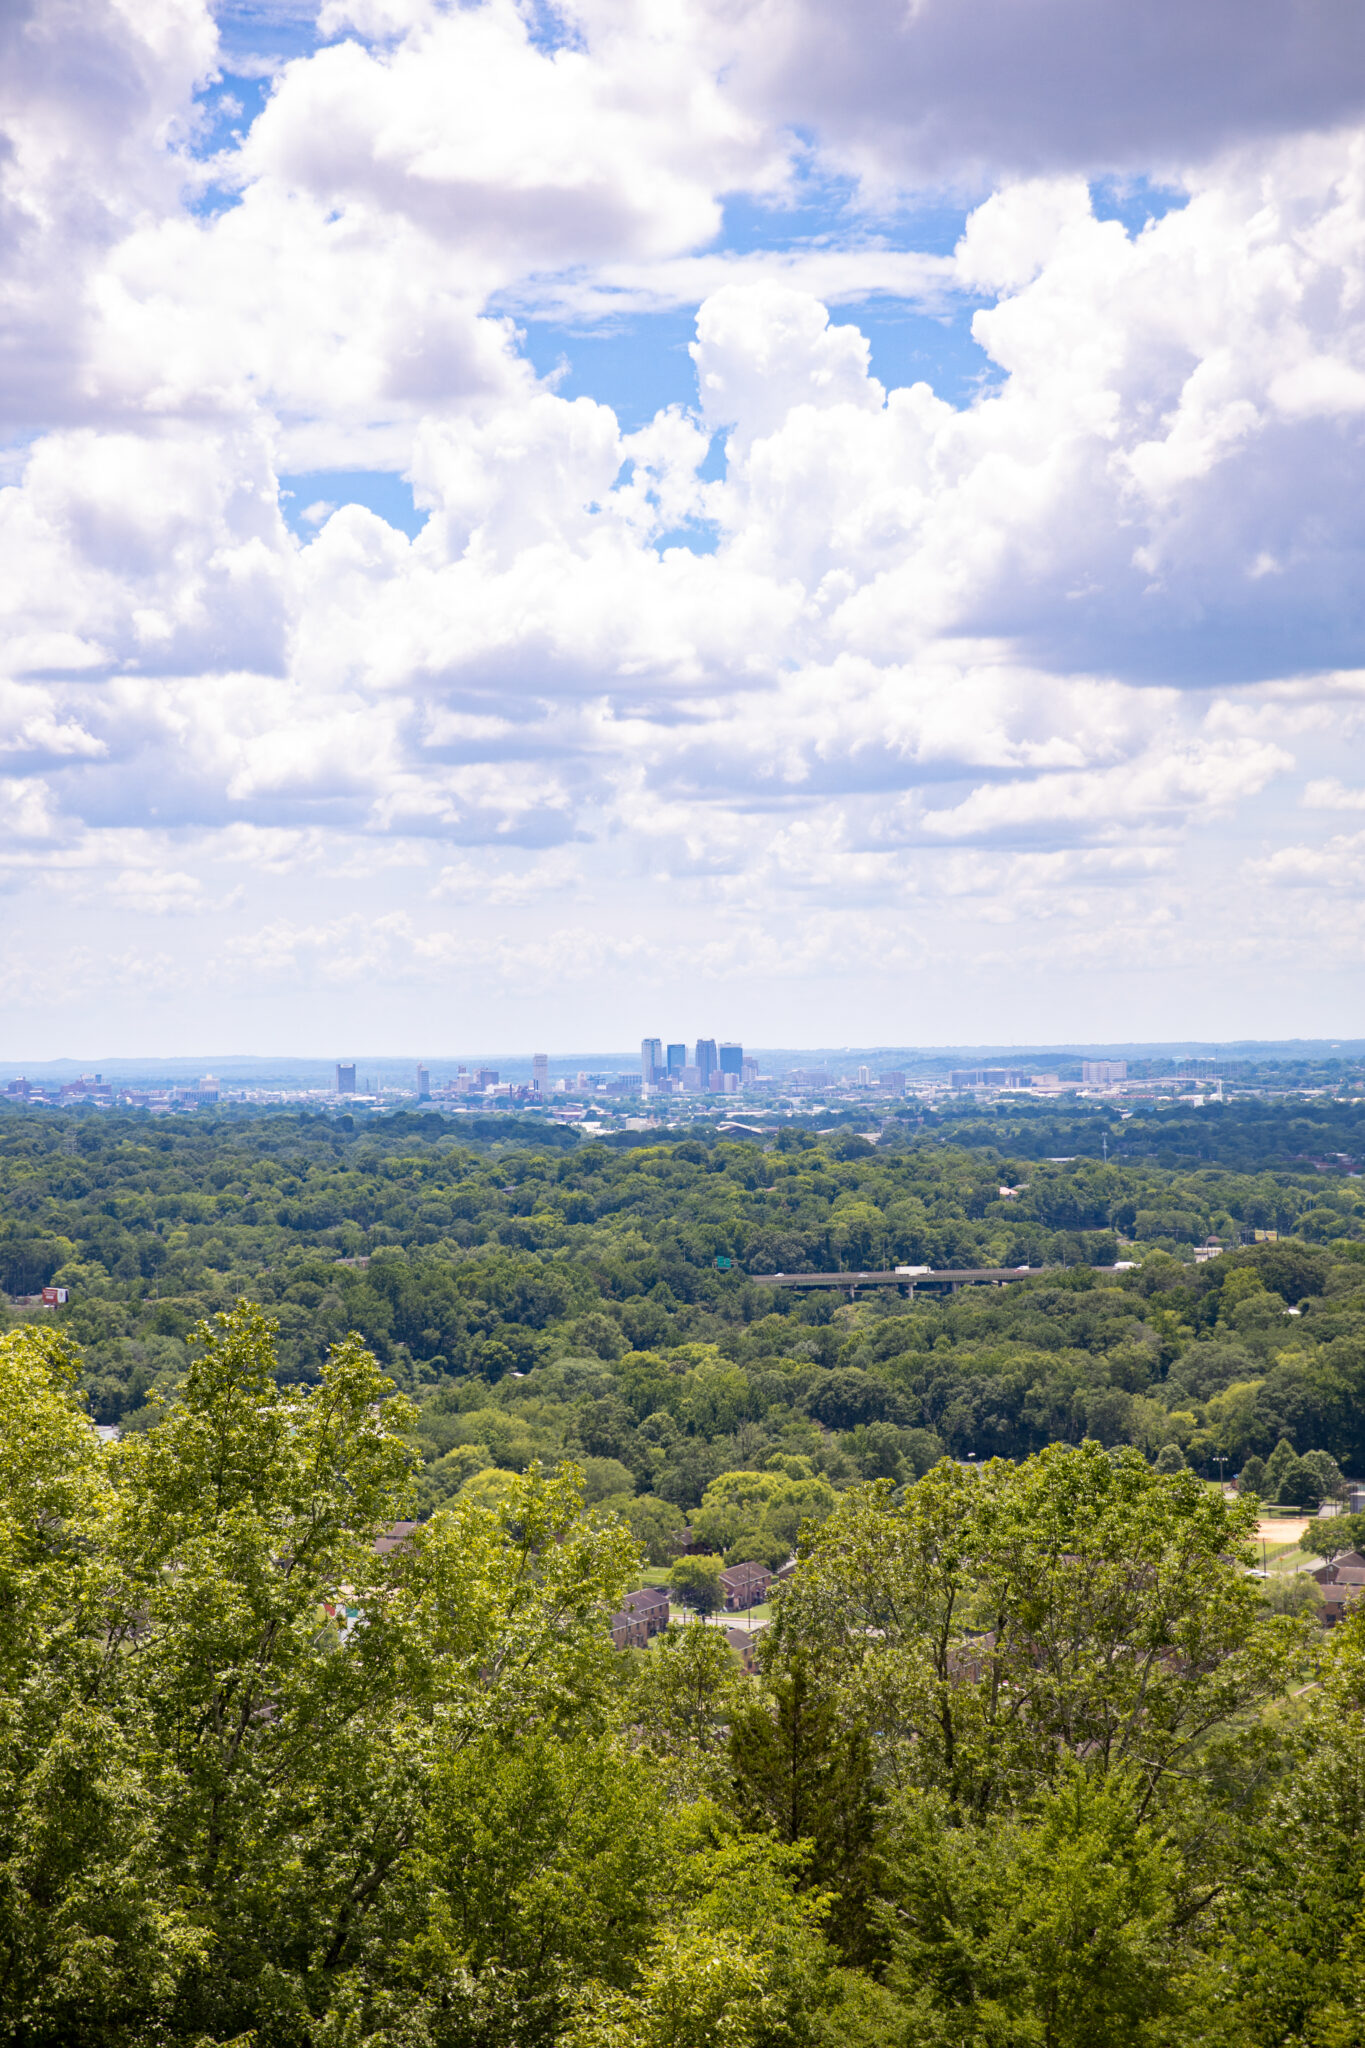 Ruffner Mountain 6 The early bird's guide to Birmingham—find out what's open before 7AM